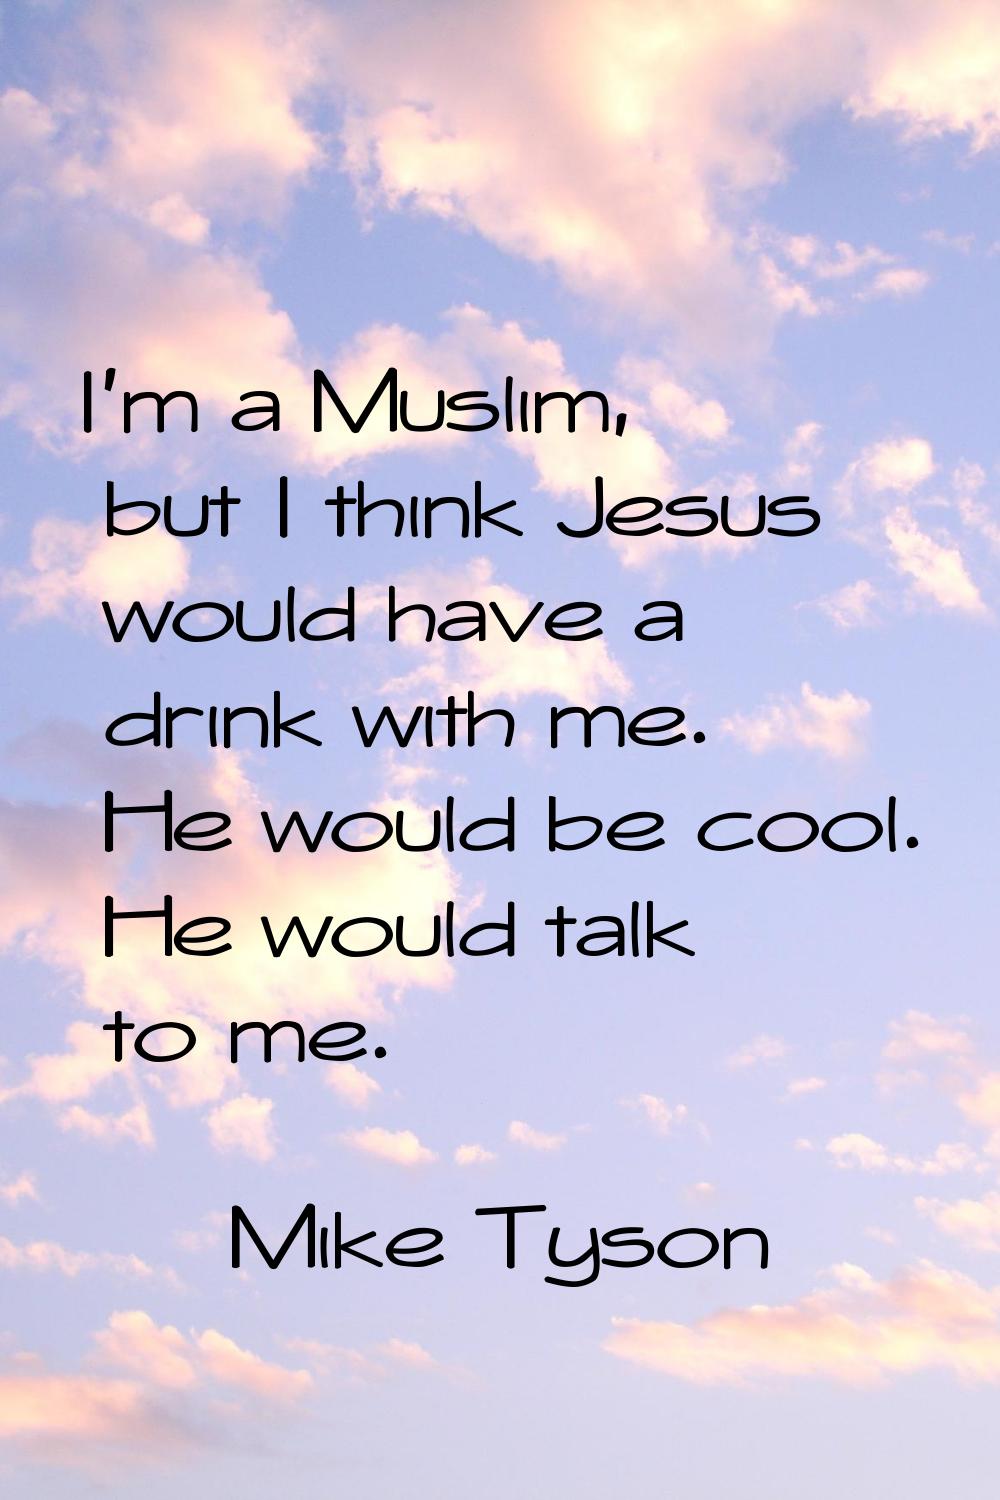 I'm a Muslim, but I think Jesus would have a drink with me. He would be cool. He would talk to me.